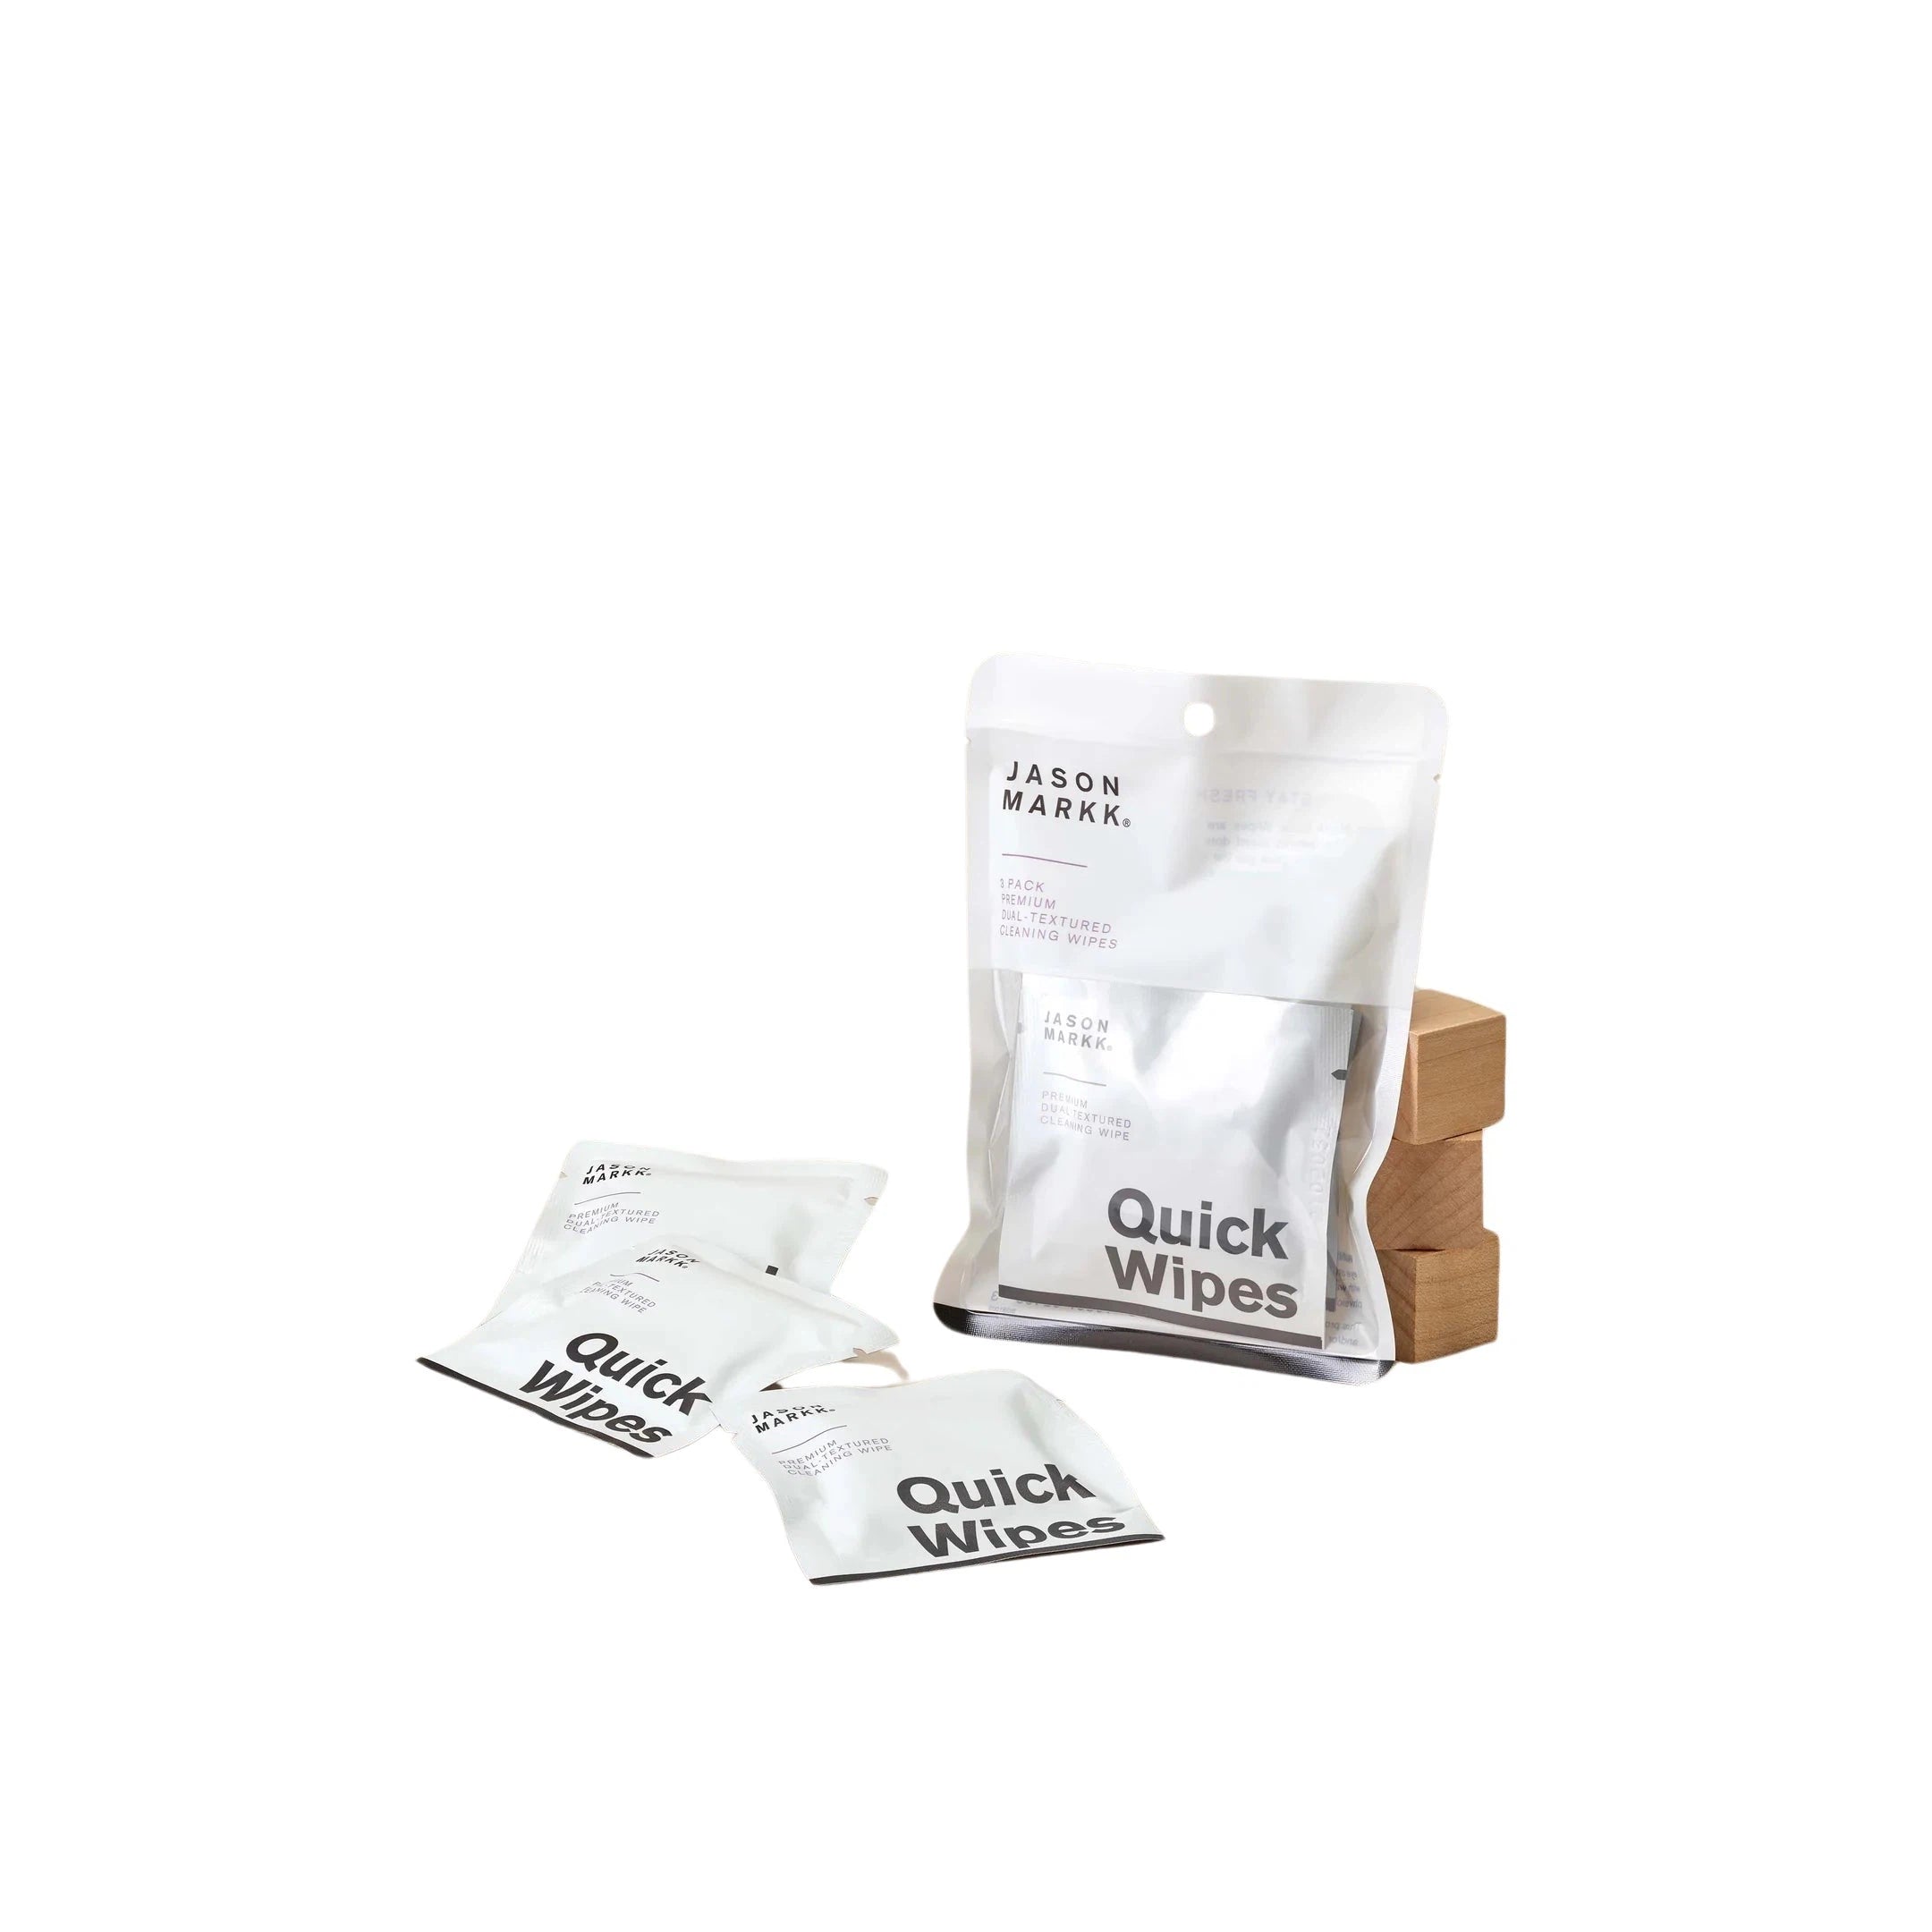 Quick Wipes- 3 pack